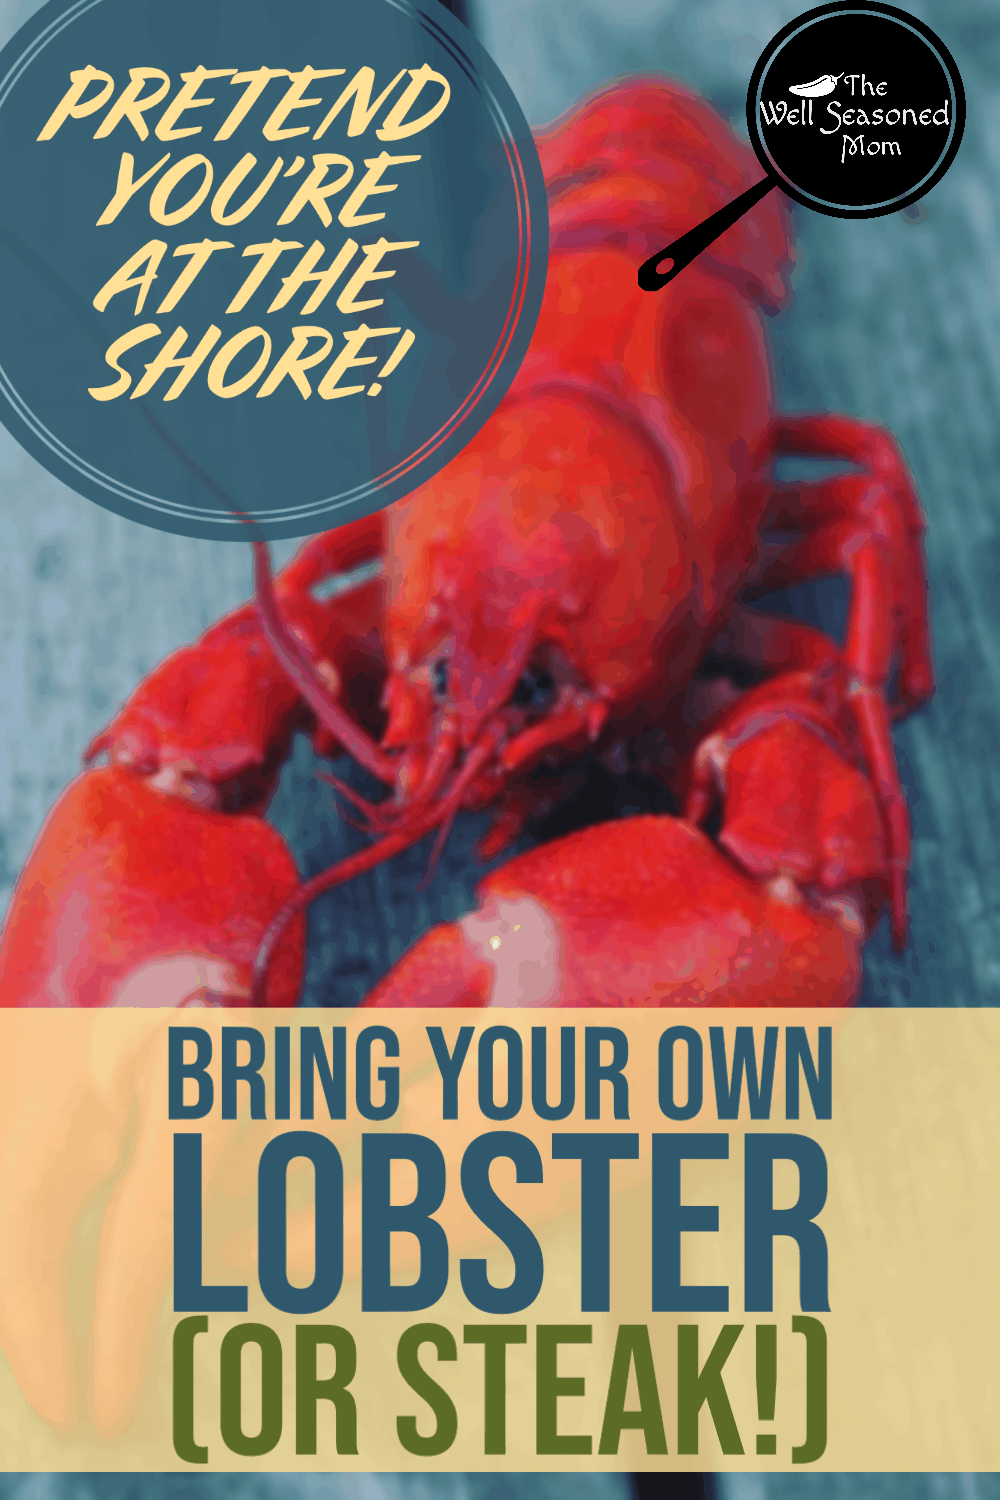 Bring Your Own Lobster - Feast for Free! - The Well Seasoned Mom